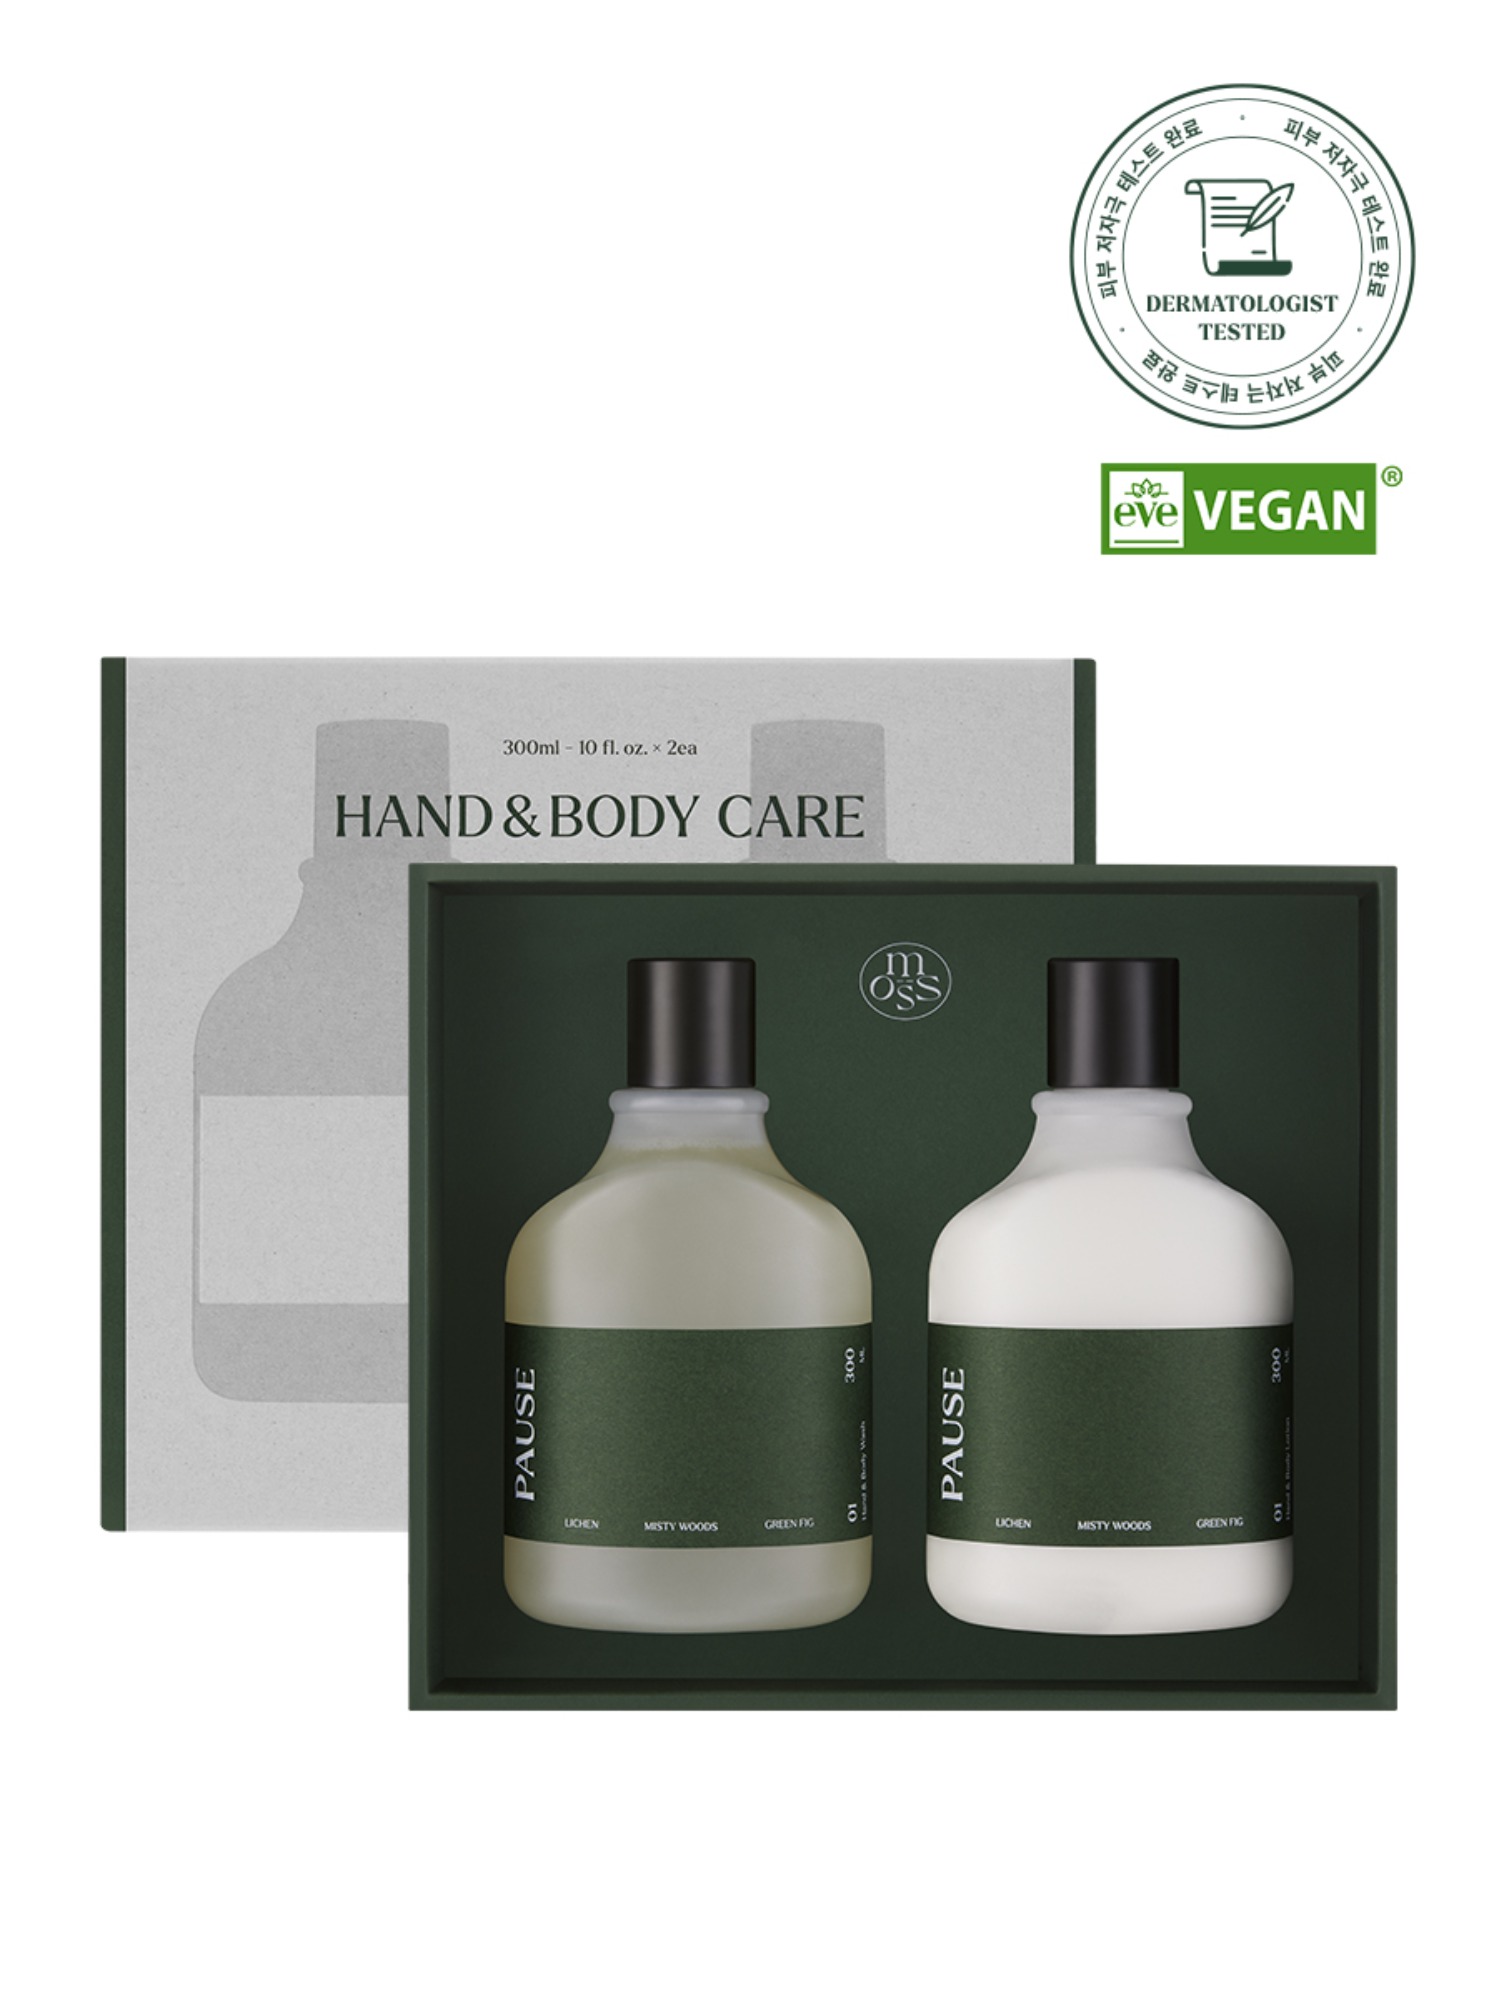 HAND&amp;BODY CARE PAUSE DUO핸드앤바디 케어 퍼즈 듀오